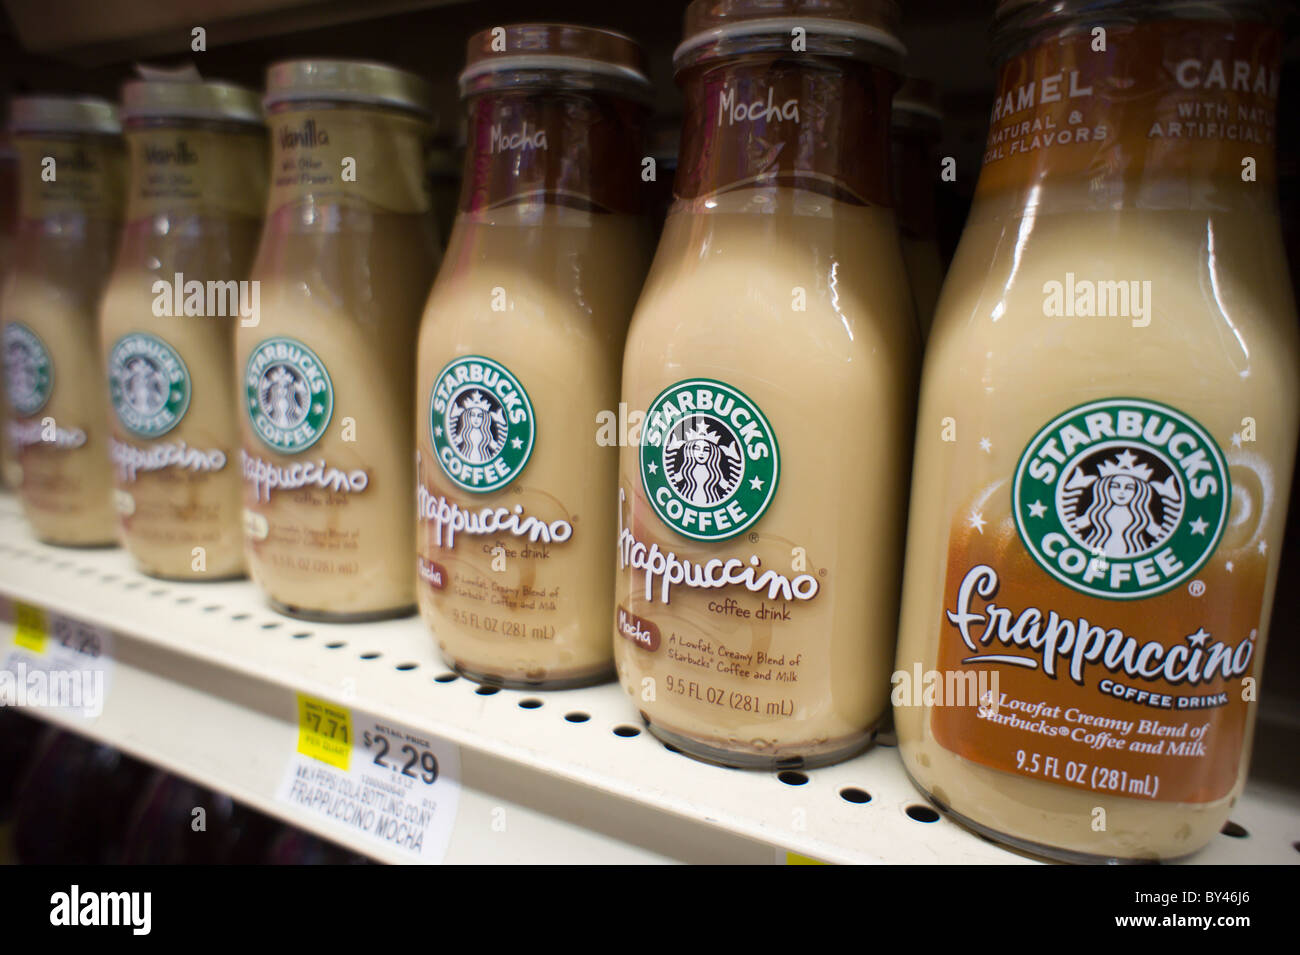 https://c8.alamy.com/comp/BY46J6/bottles-of-starbucks-frappuccino-coffee-are-seen-a-supermarket-on-BY46J6.jpg